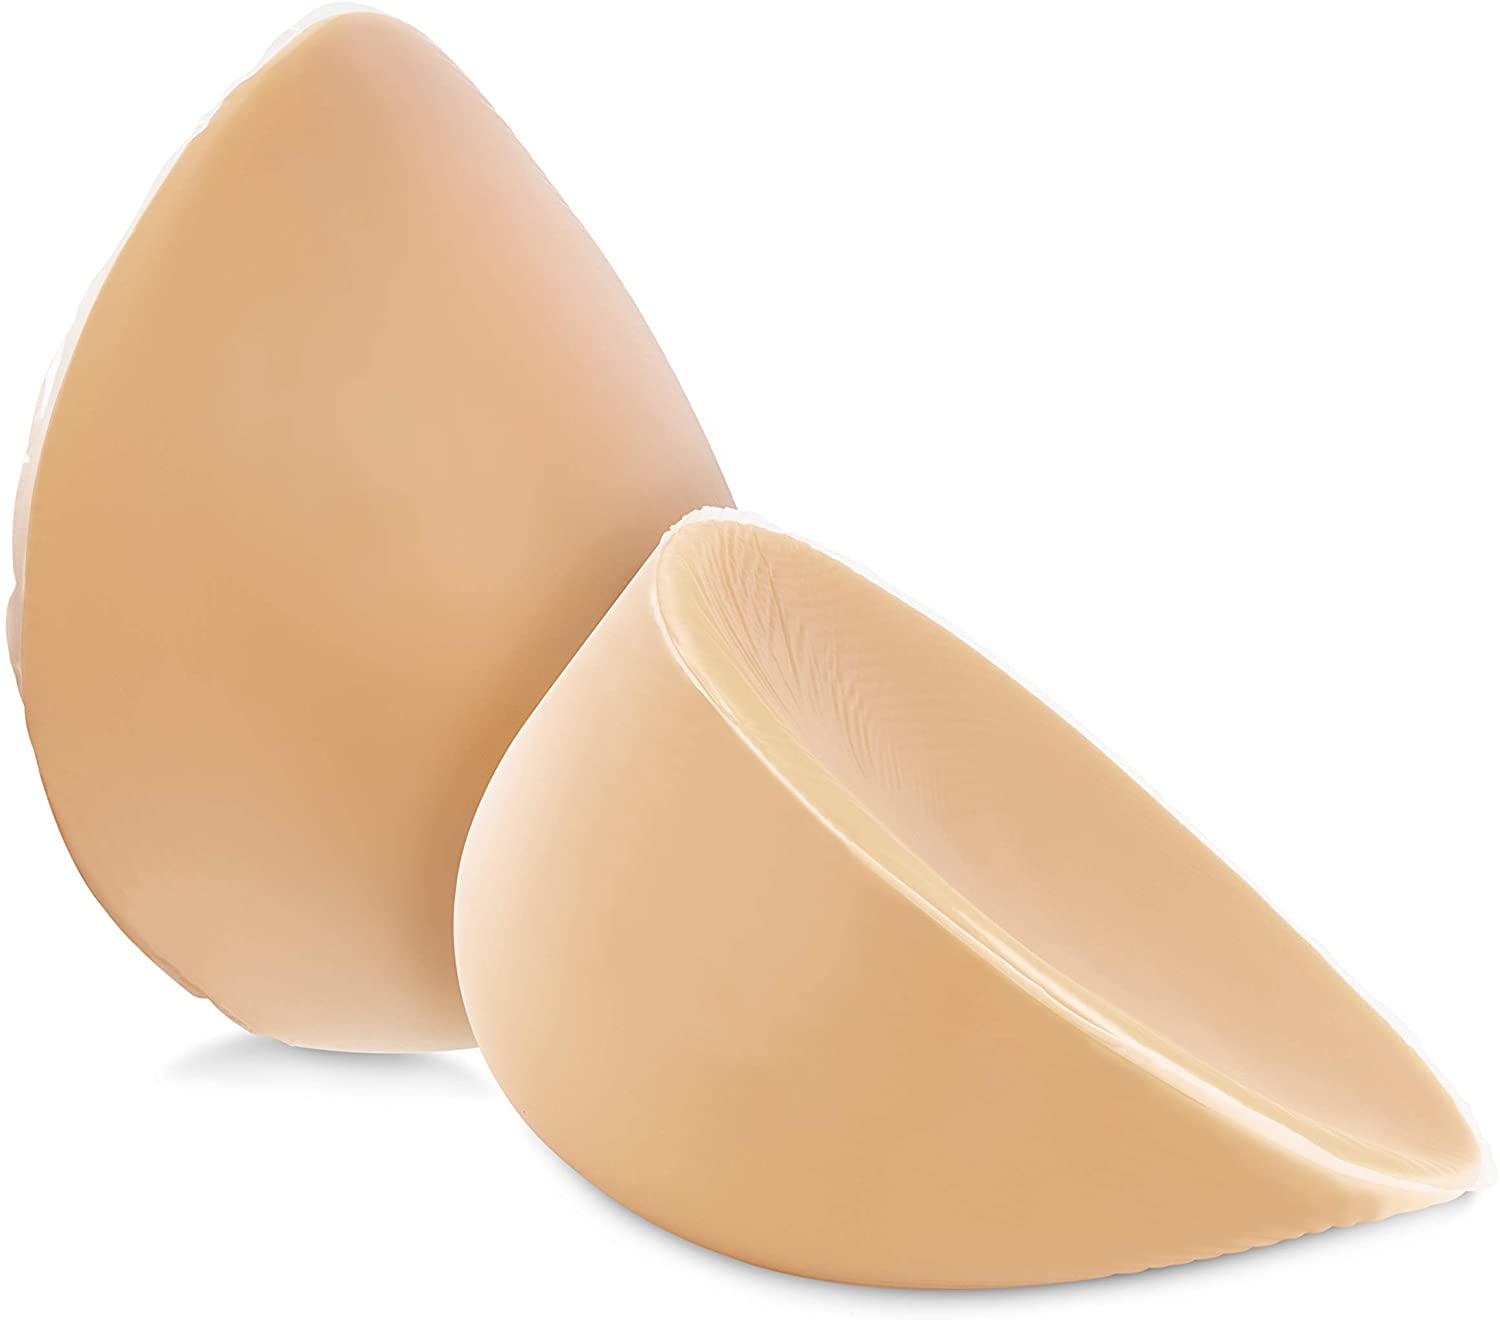 Feminique Silicone Breast Forms for Mastectomy, DD Cup (1000g) Suntan 